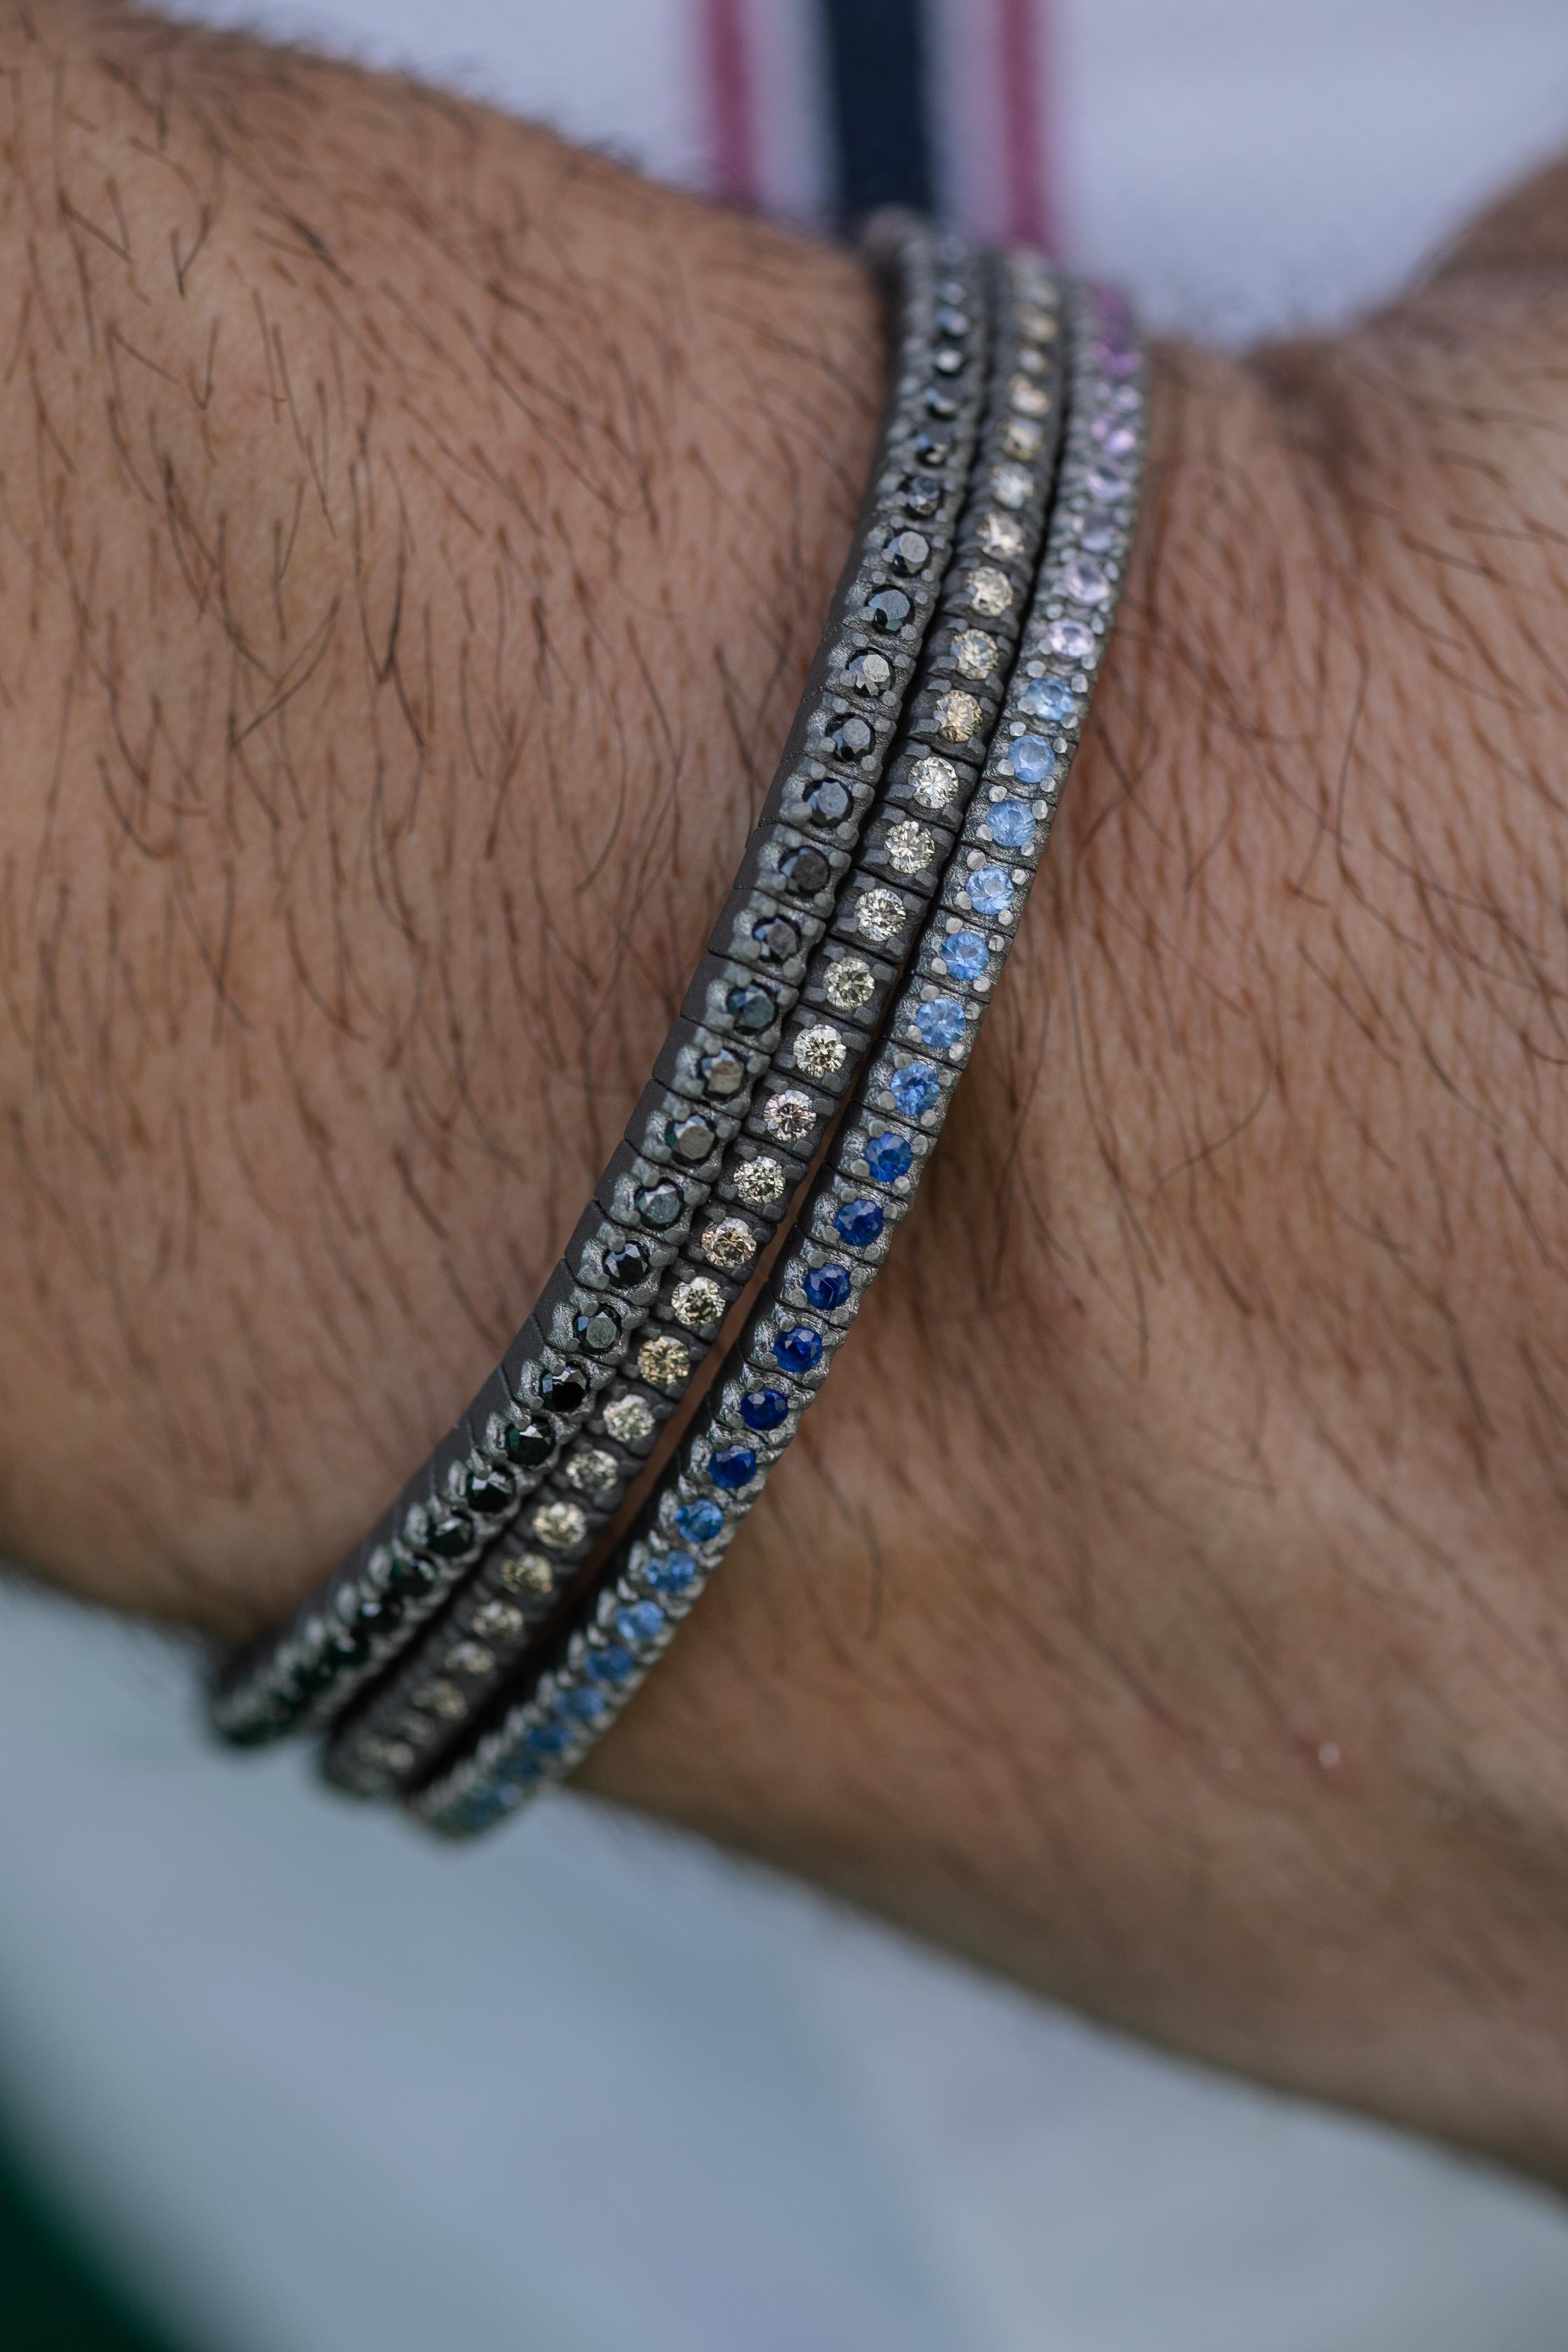 This titanium flexible bracelet is from our Men's collection. Bracelet is decorated by beautiful natural multi-coloured sapphires in total of 3.20 Carat and with 18K rose gold details. The diameter of the bracelet is 6.5 cm. Perfect for daily